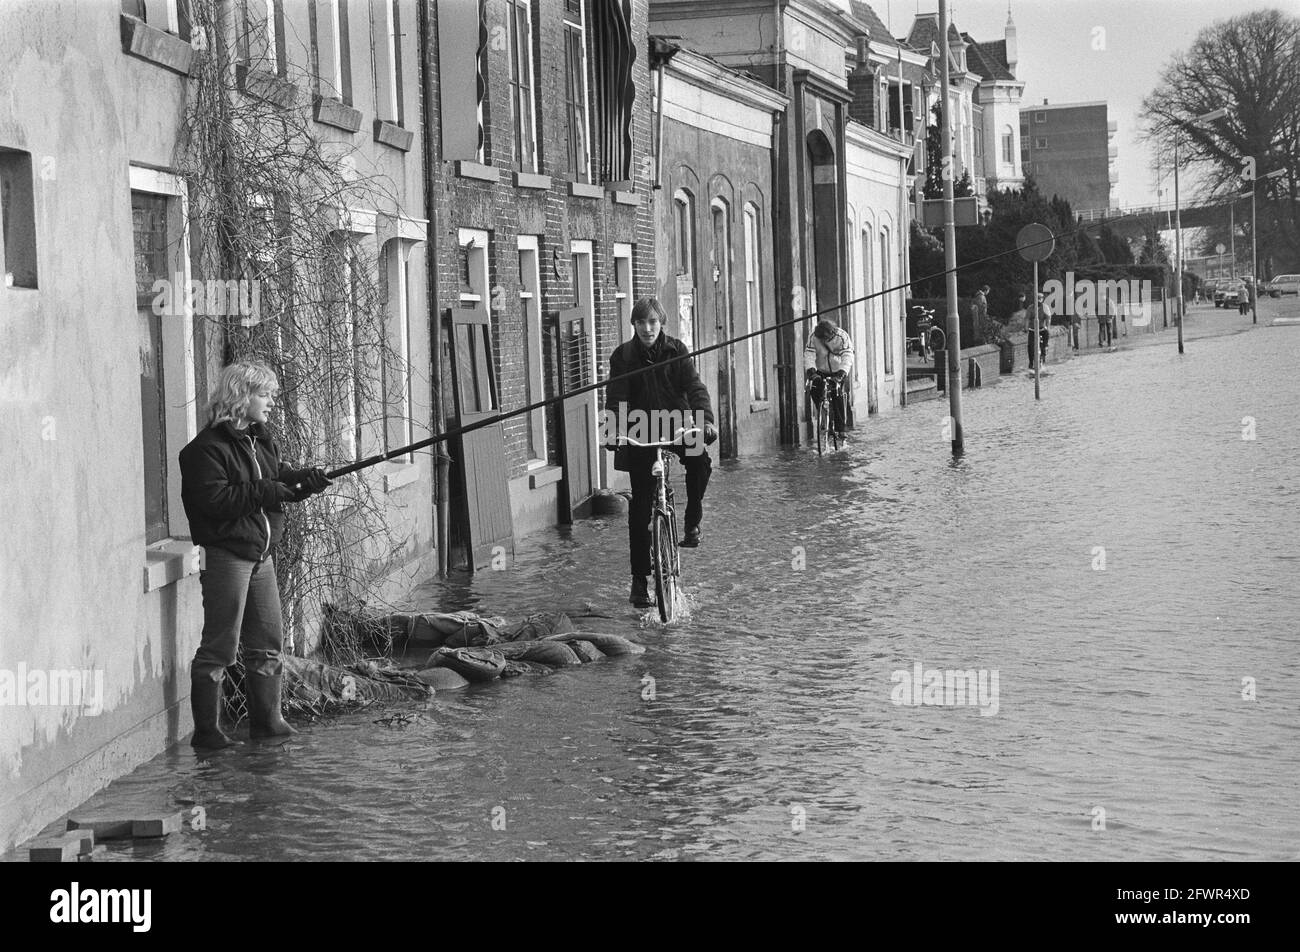 Water nuisance due to melting and rain water. Fishermen fishes in street in Deventer, January 8, 1982, WATEROVERLAST, The Netherlands, 20th century press agency photo, news to remember, documentary, historic photography 1945-1990, visual stories, human history of the Twentieth Century, capturing moments in time Stock Photo